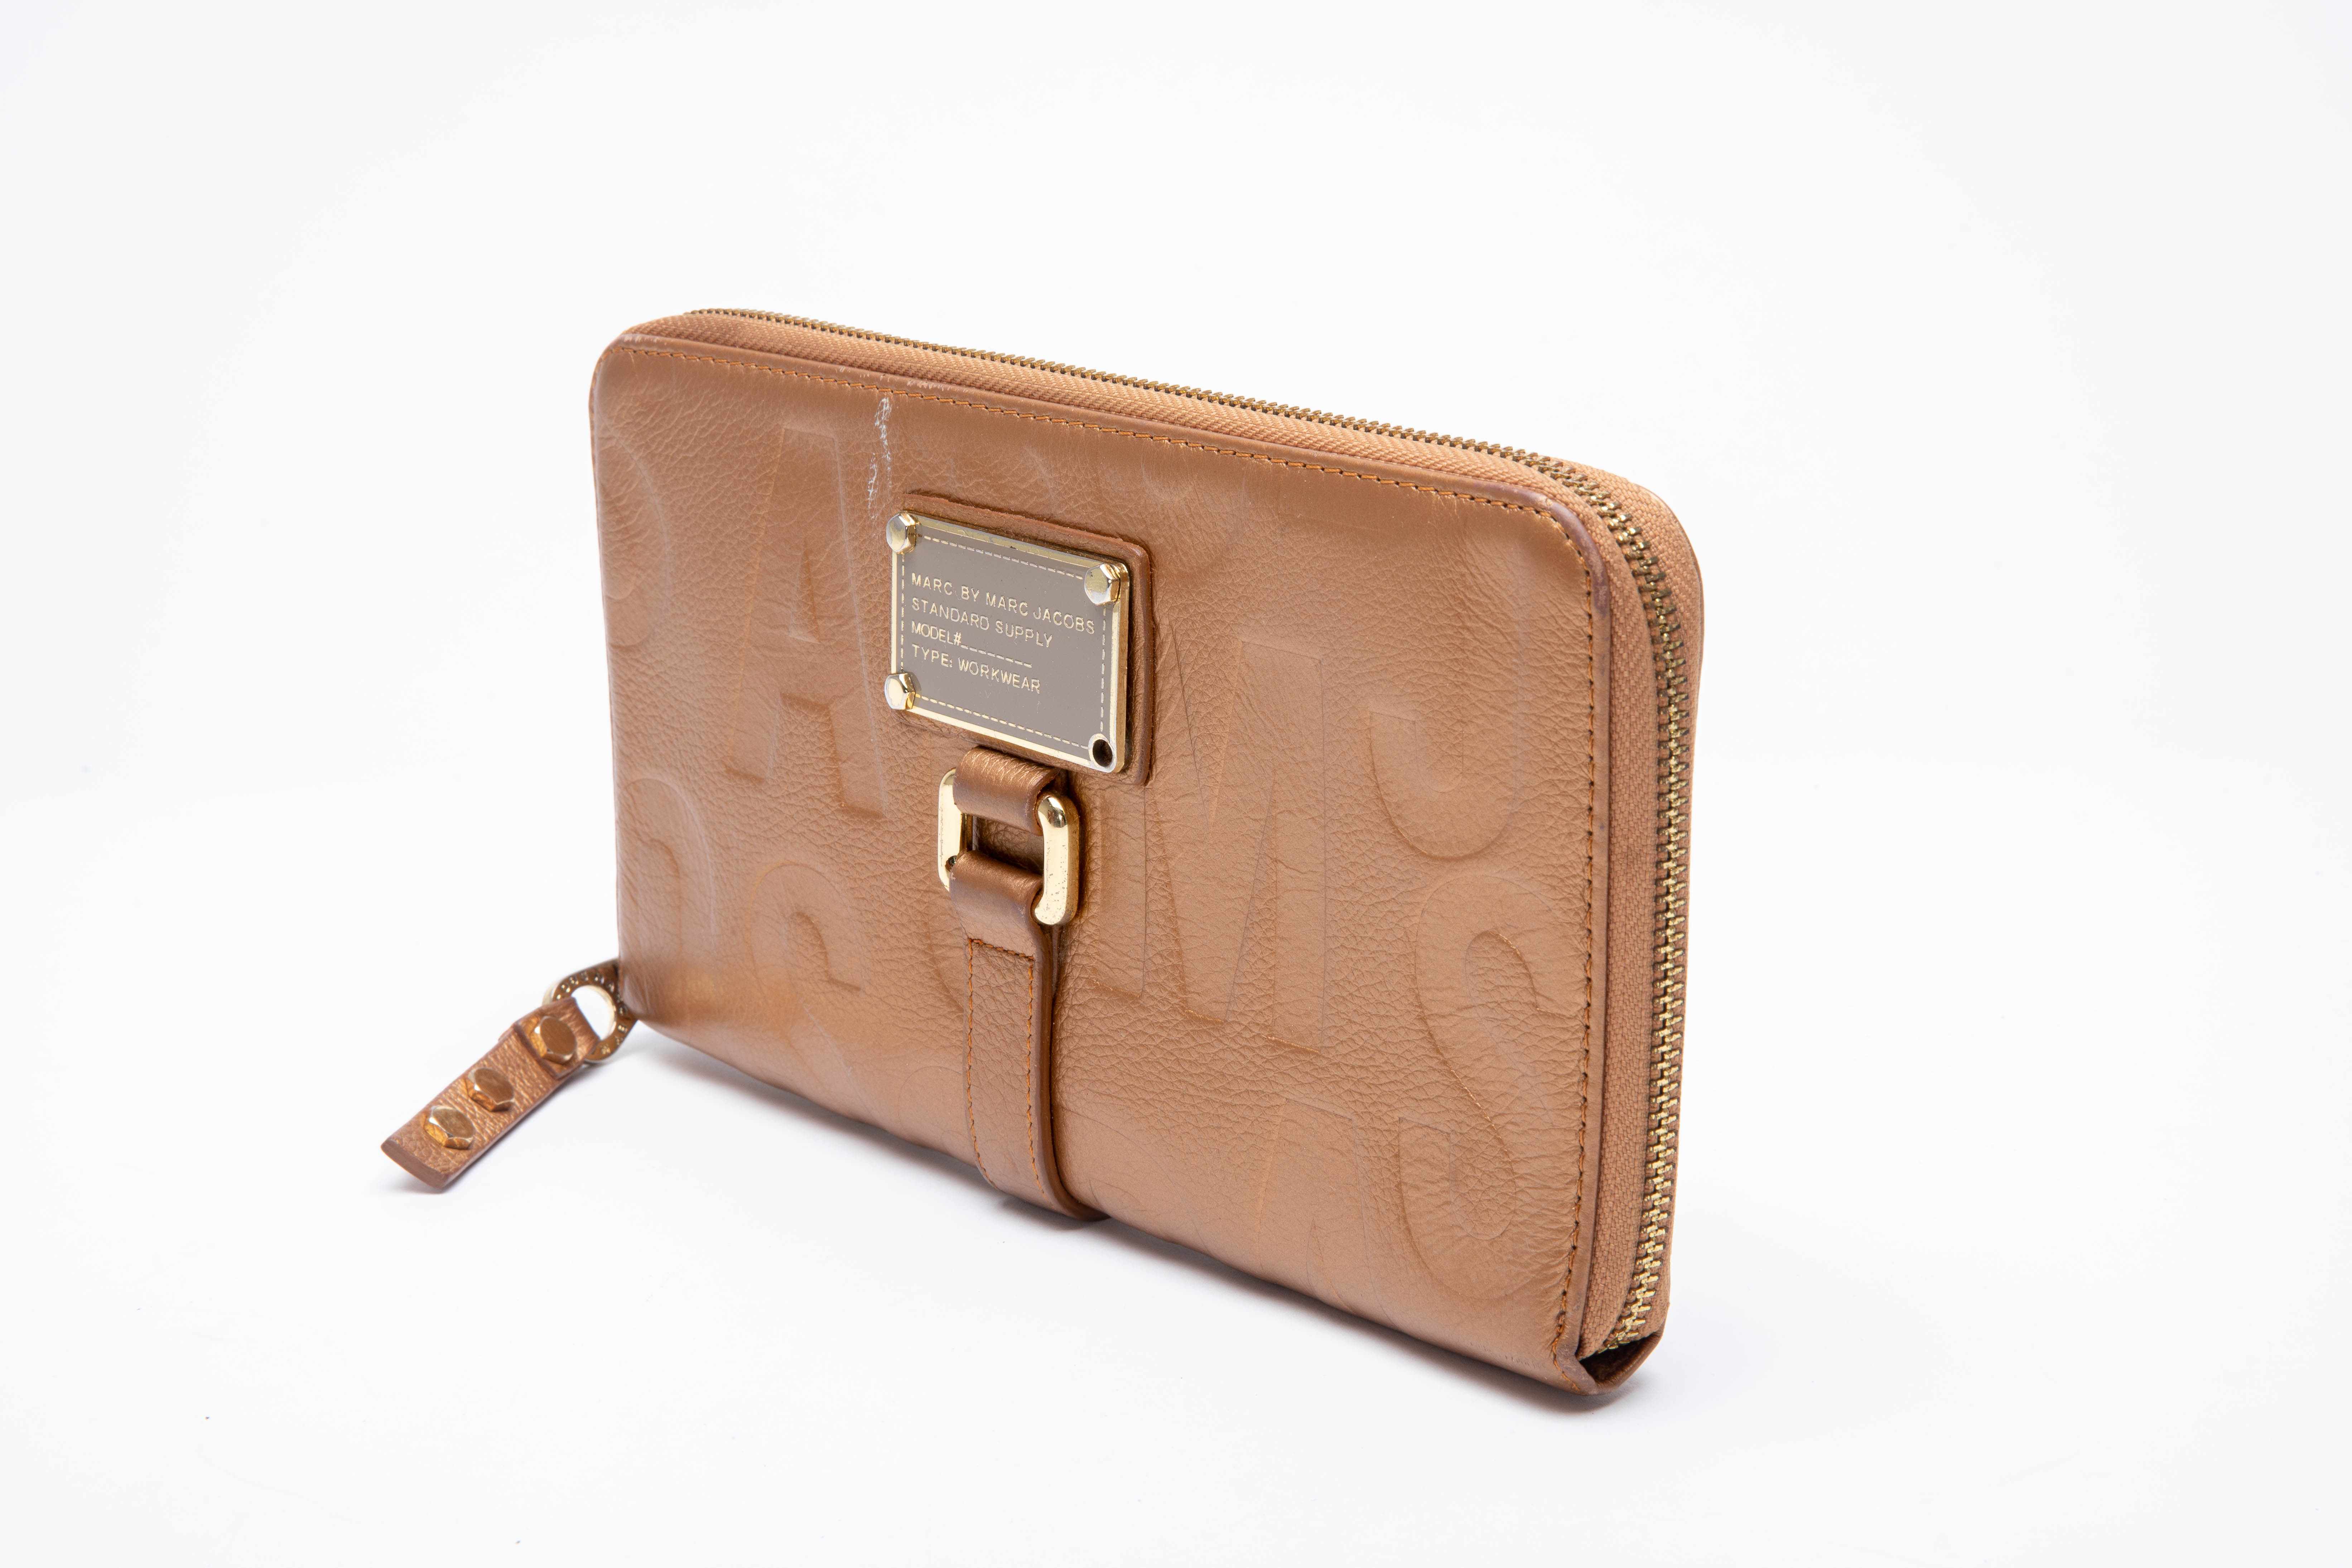 A MARC JACOBS SMALL CLUTCH BAG - Image 2 of 4